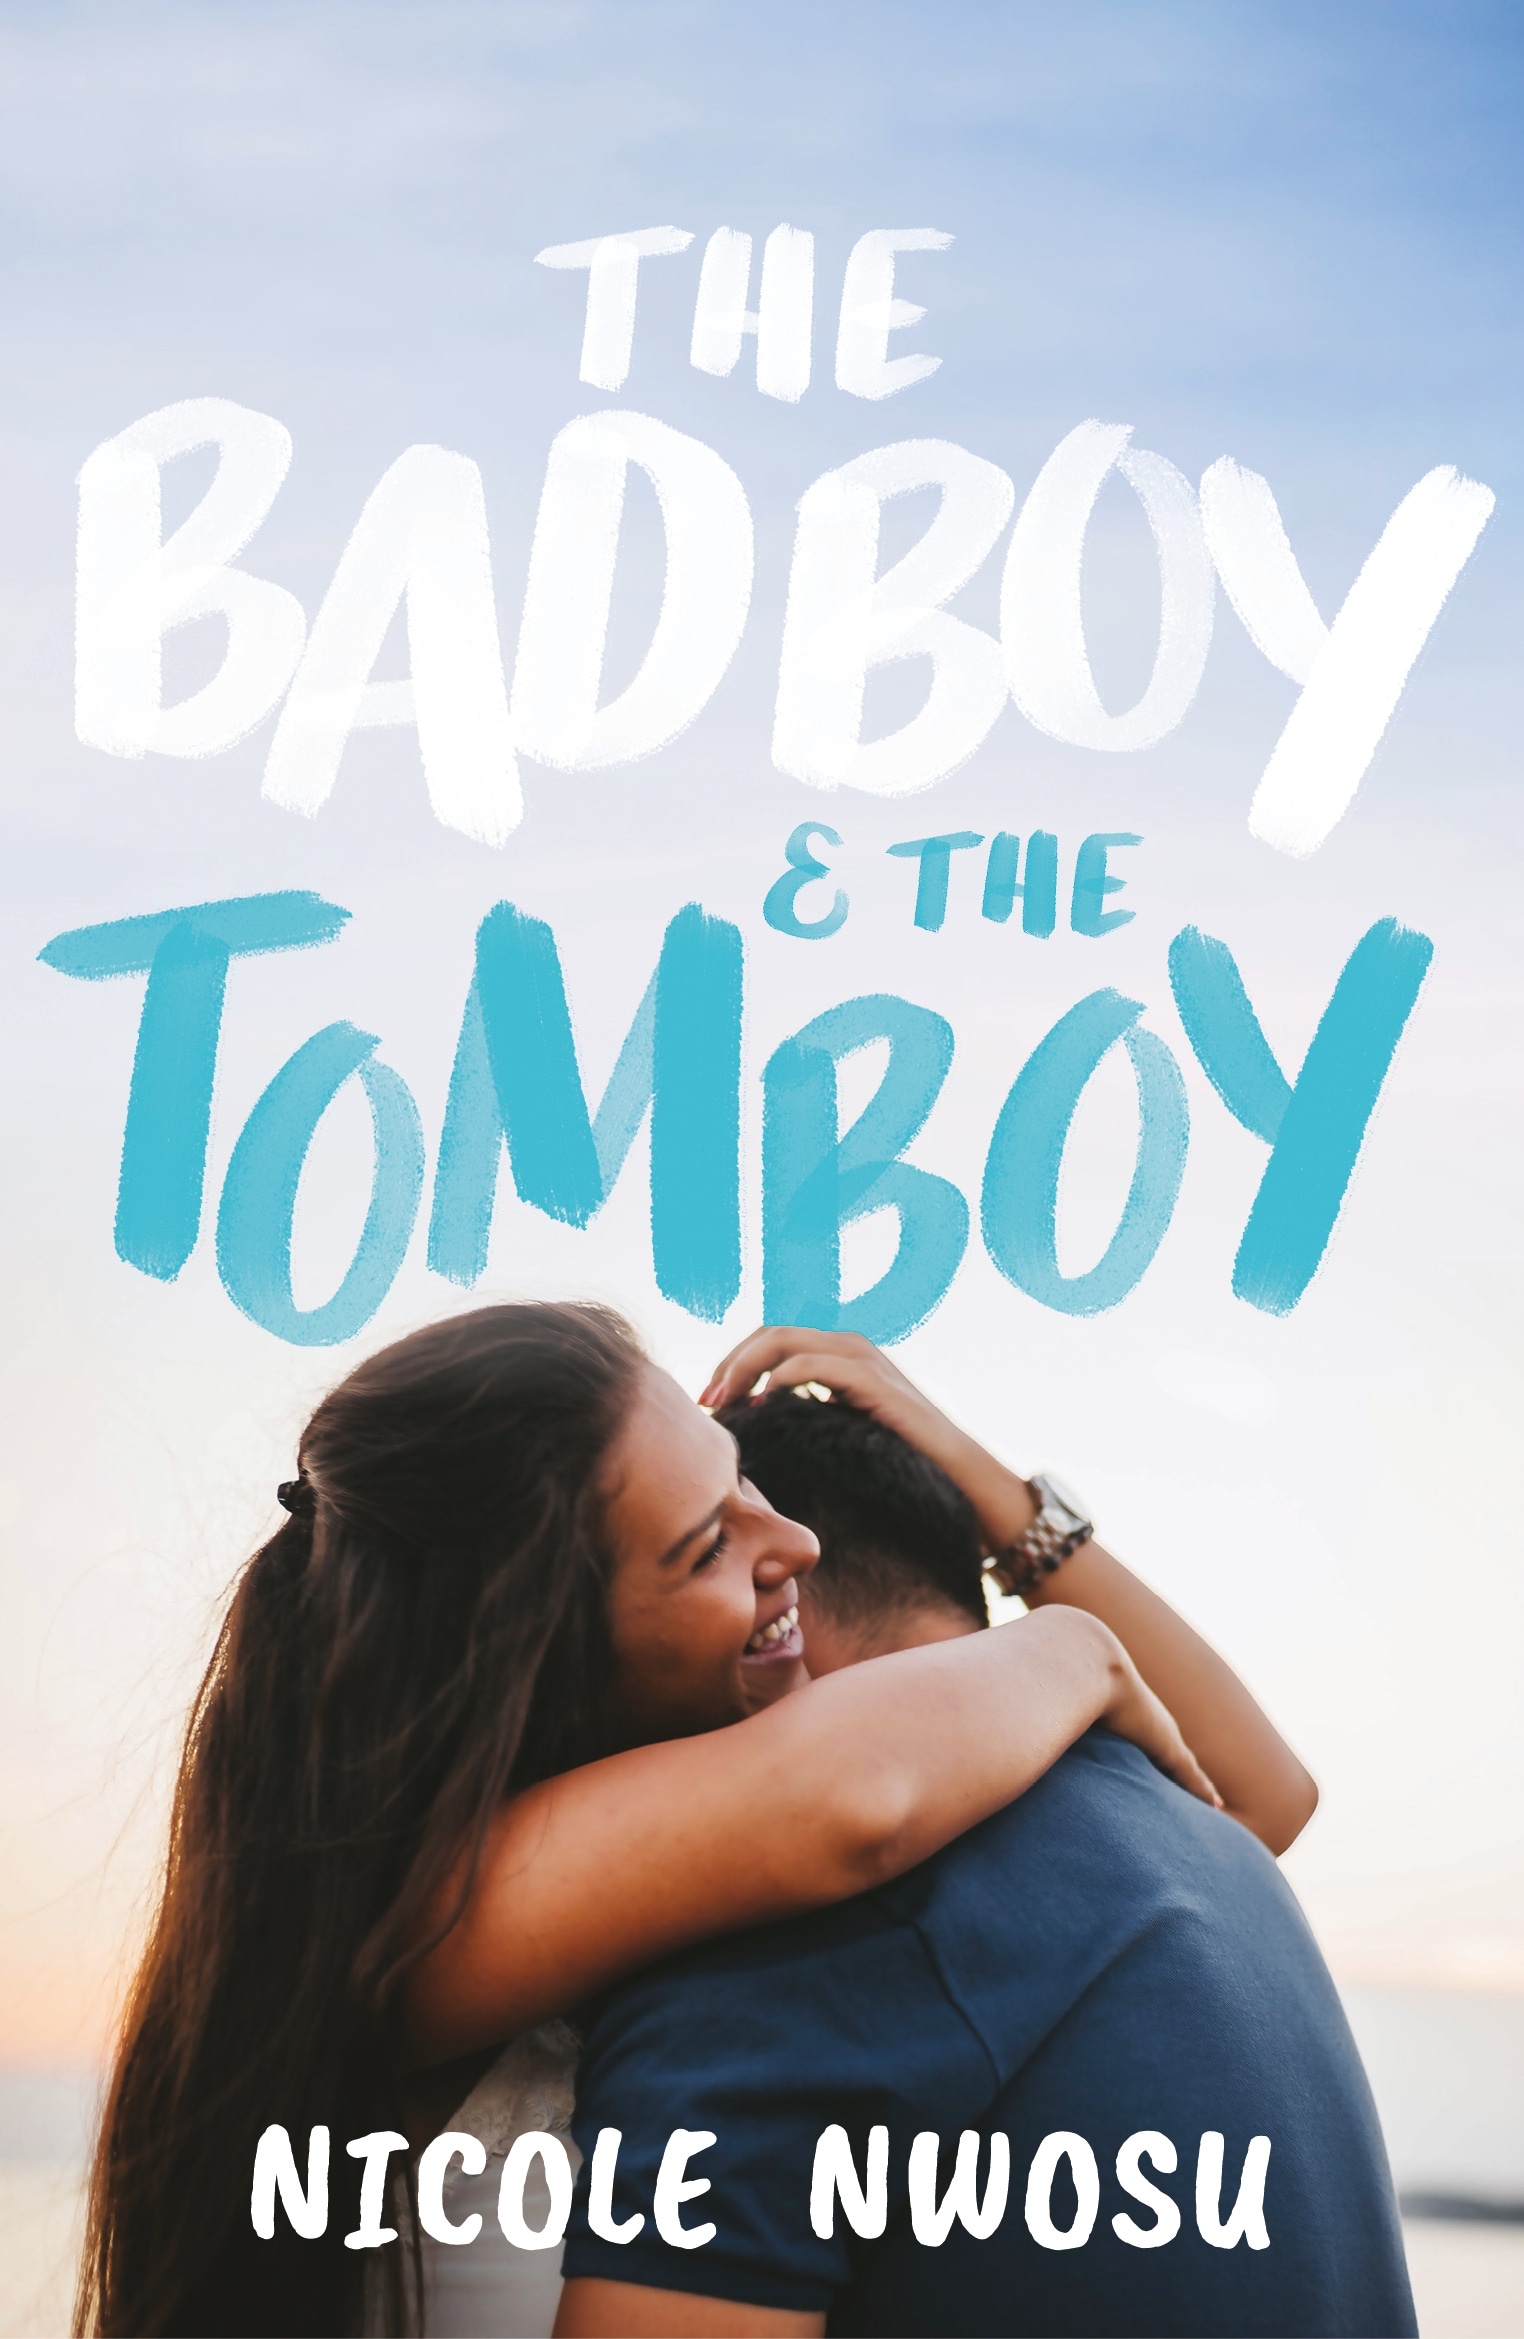 Book “The Bad Boy and the Tomboy” by Nicole Nwosu — November 26, 2020